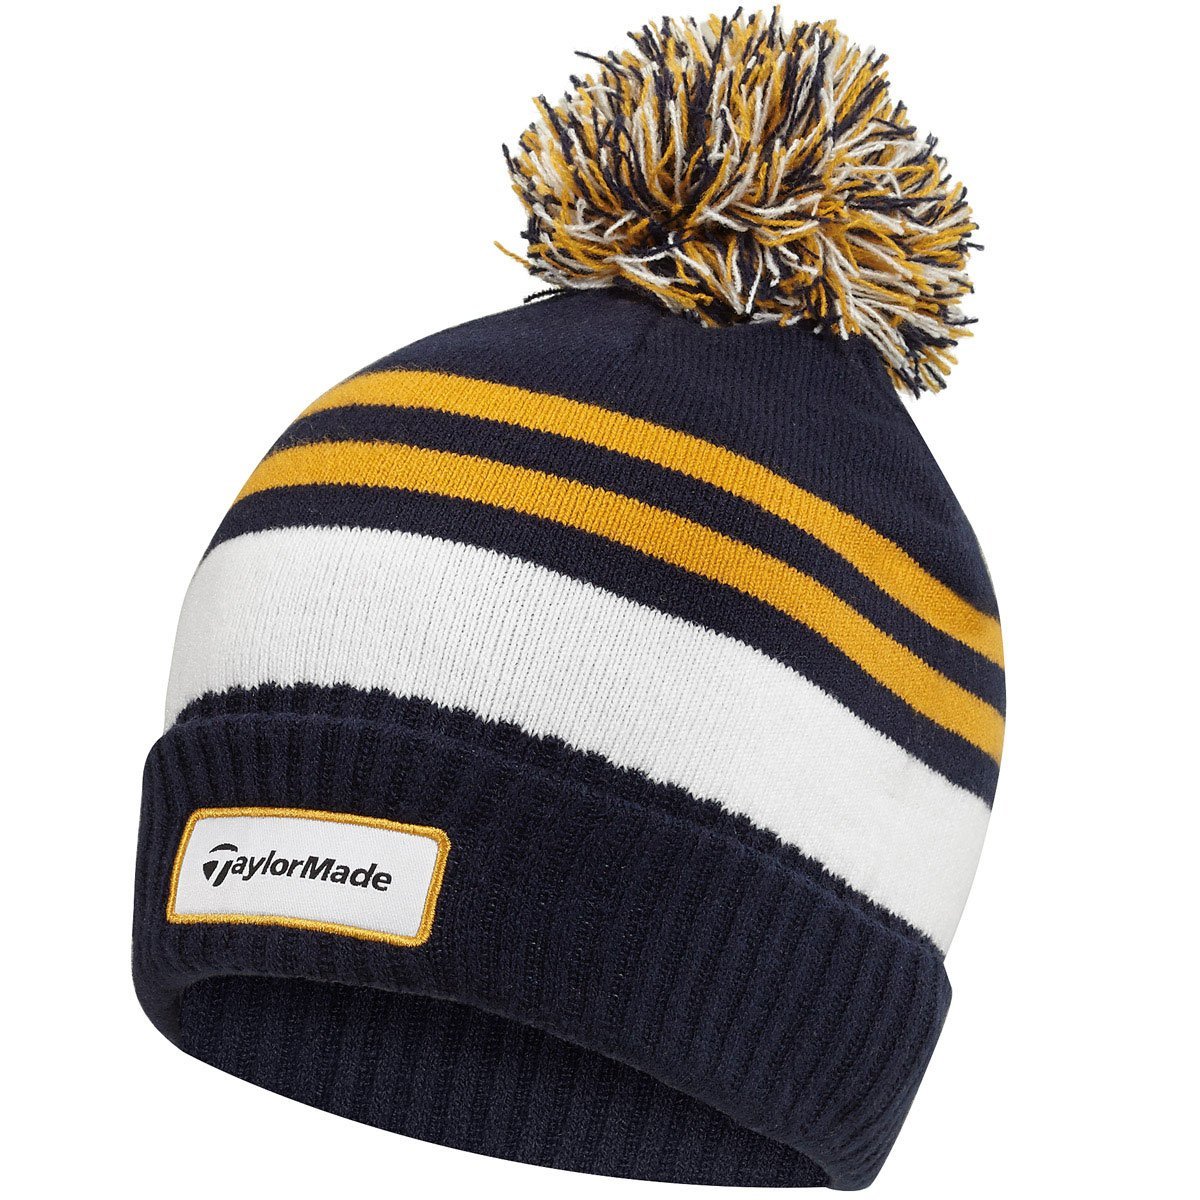 Mens Taylormade Double Knit Thermal Striped Golf Beanie Bobble Hats